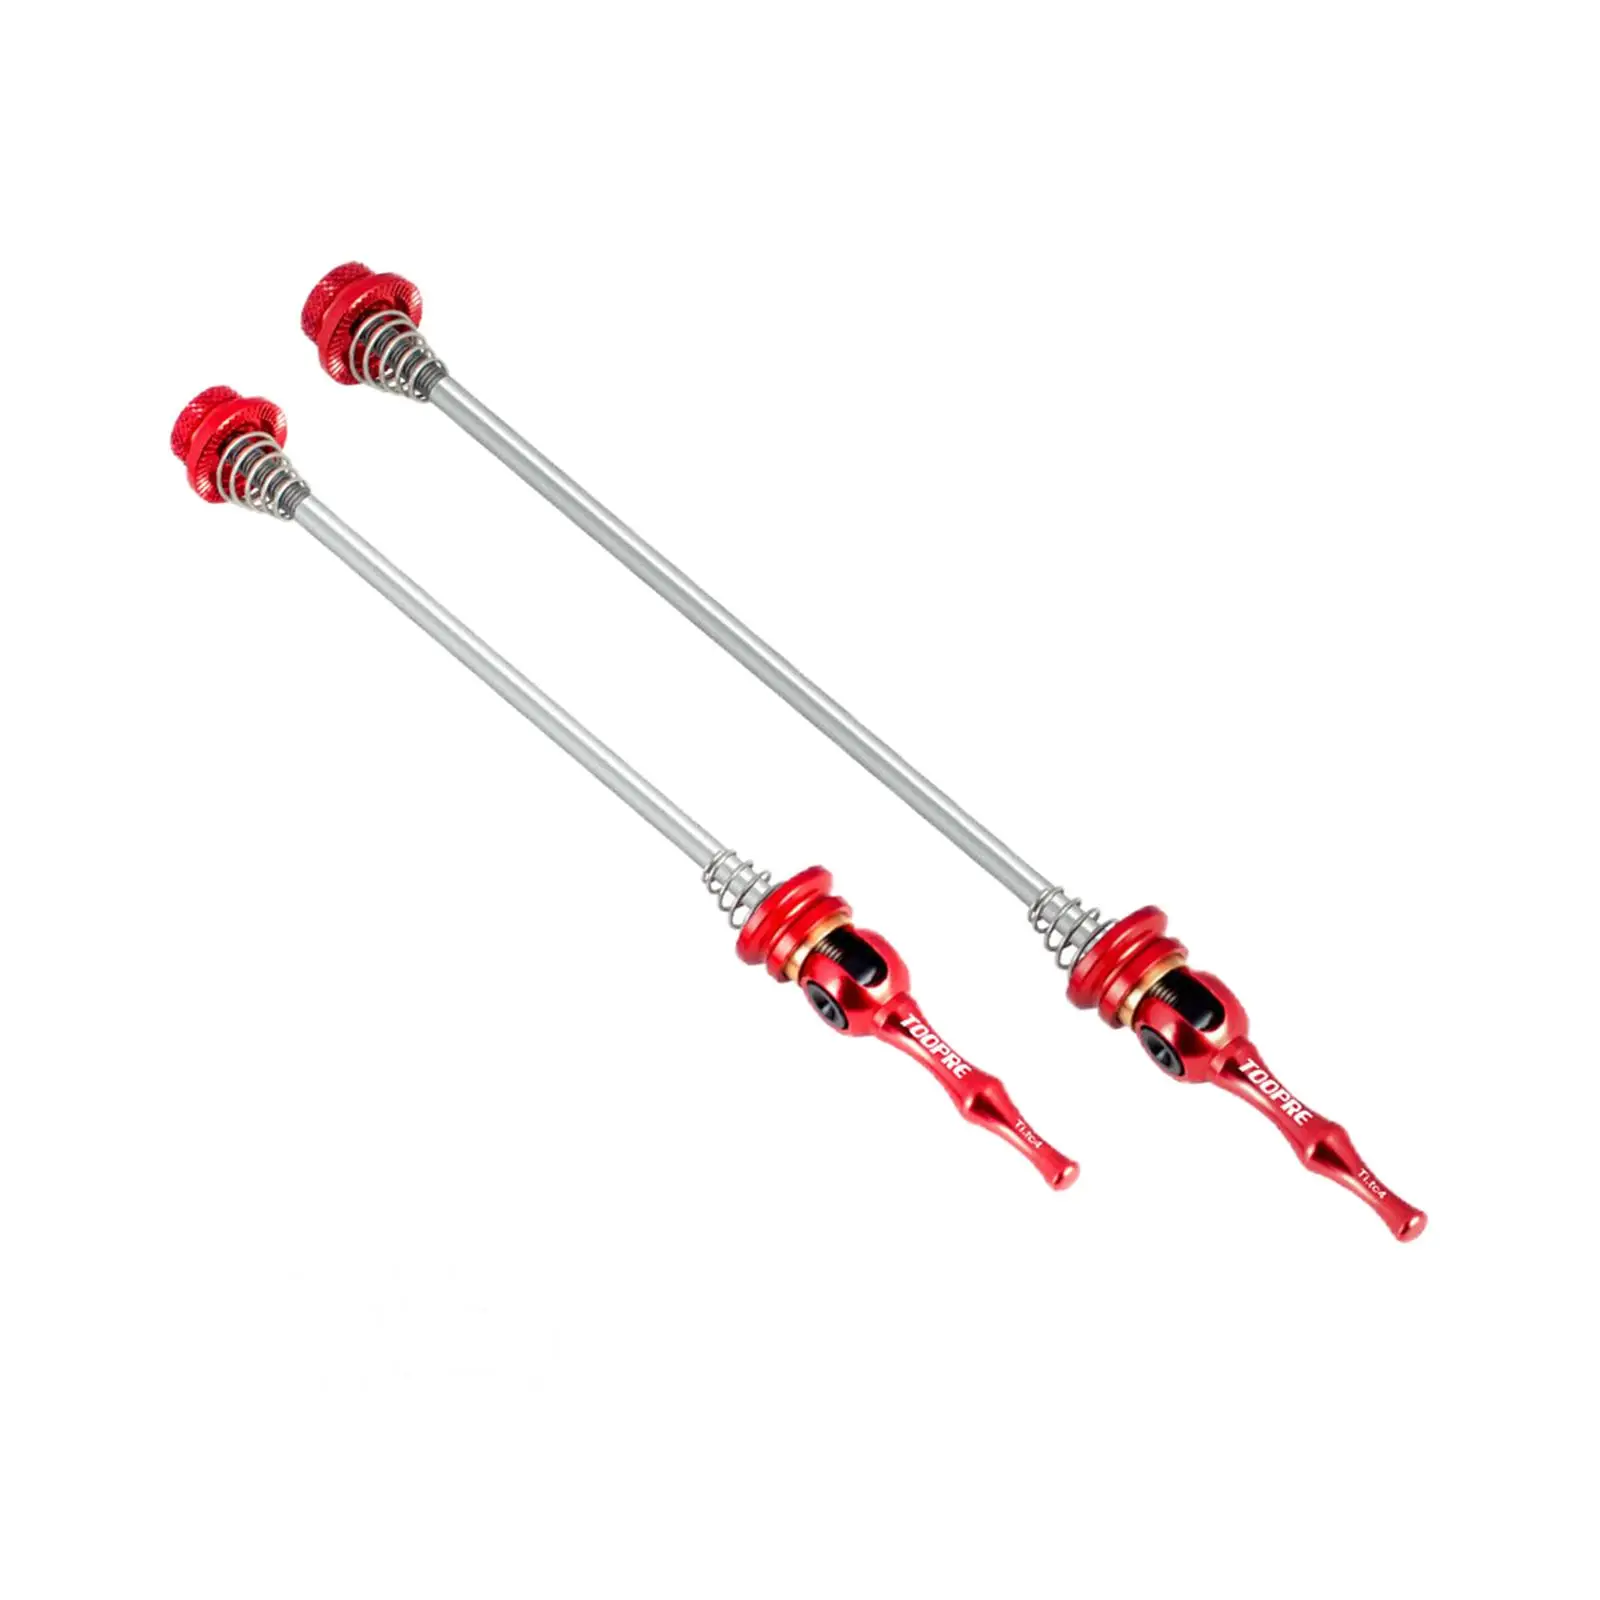 2Pcs Bike Quick Release Skewer 100mm 135mm Wheel Hub for Mountain Bicycle Cycling Tools